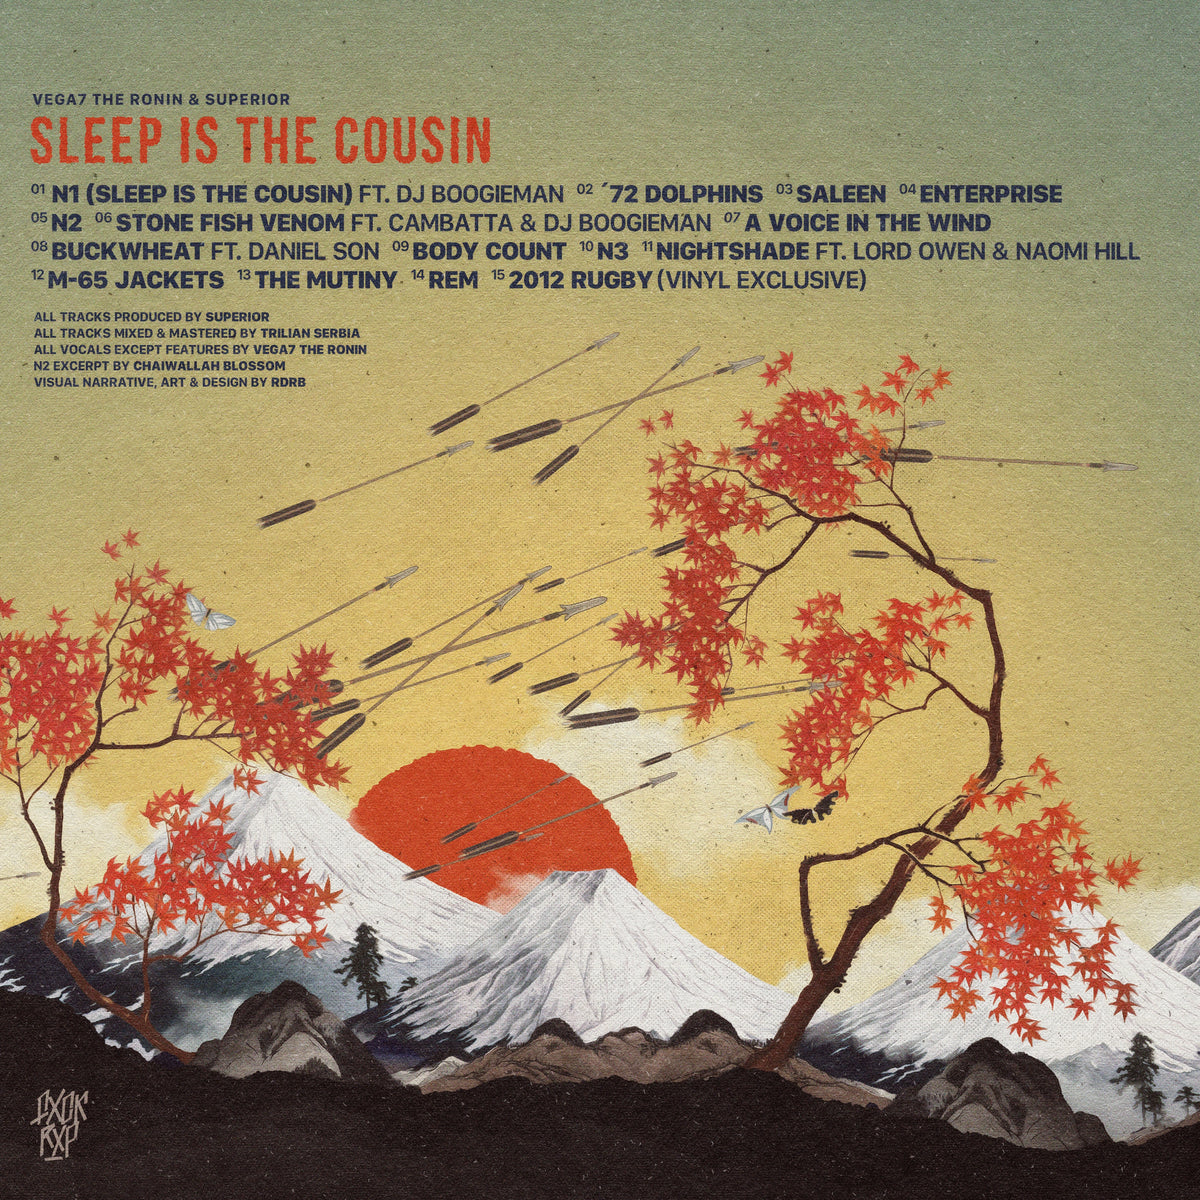 Sleep Is the Cousin by Vega7 the Ronin & Superior (Album, Hardcore Hip  Hop): Reviews, Ratings, Credits, Song list - Rate Your Music